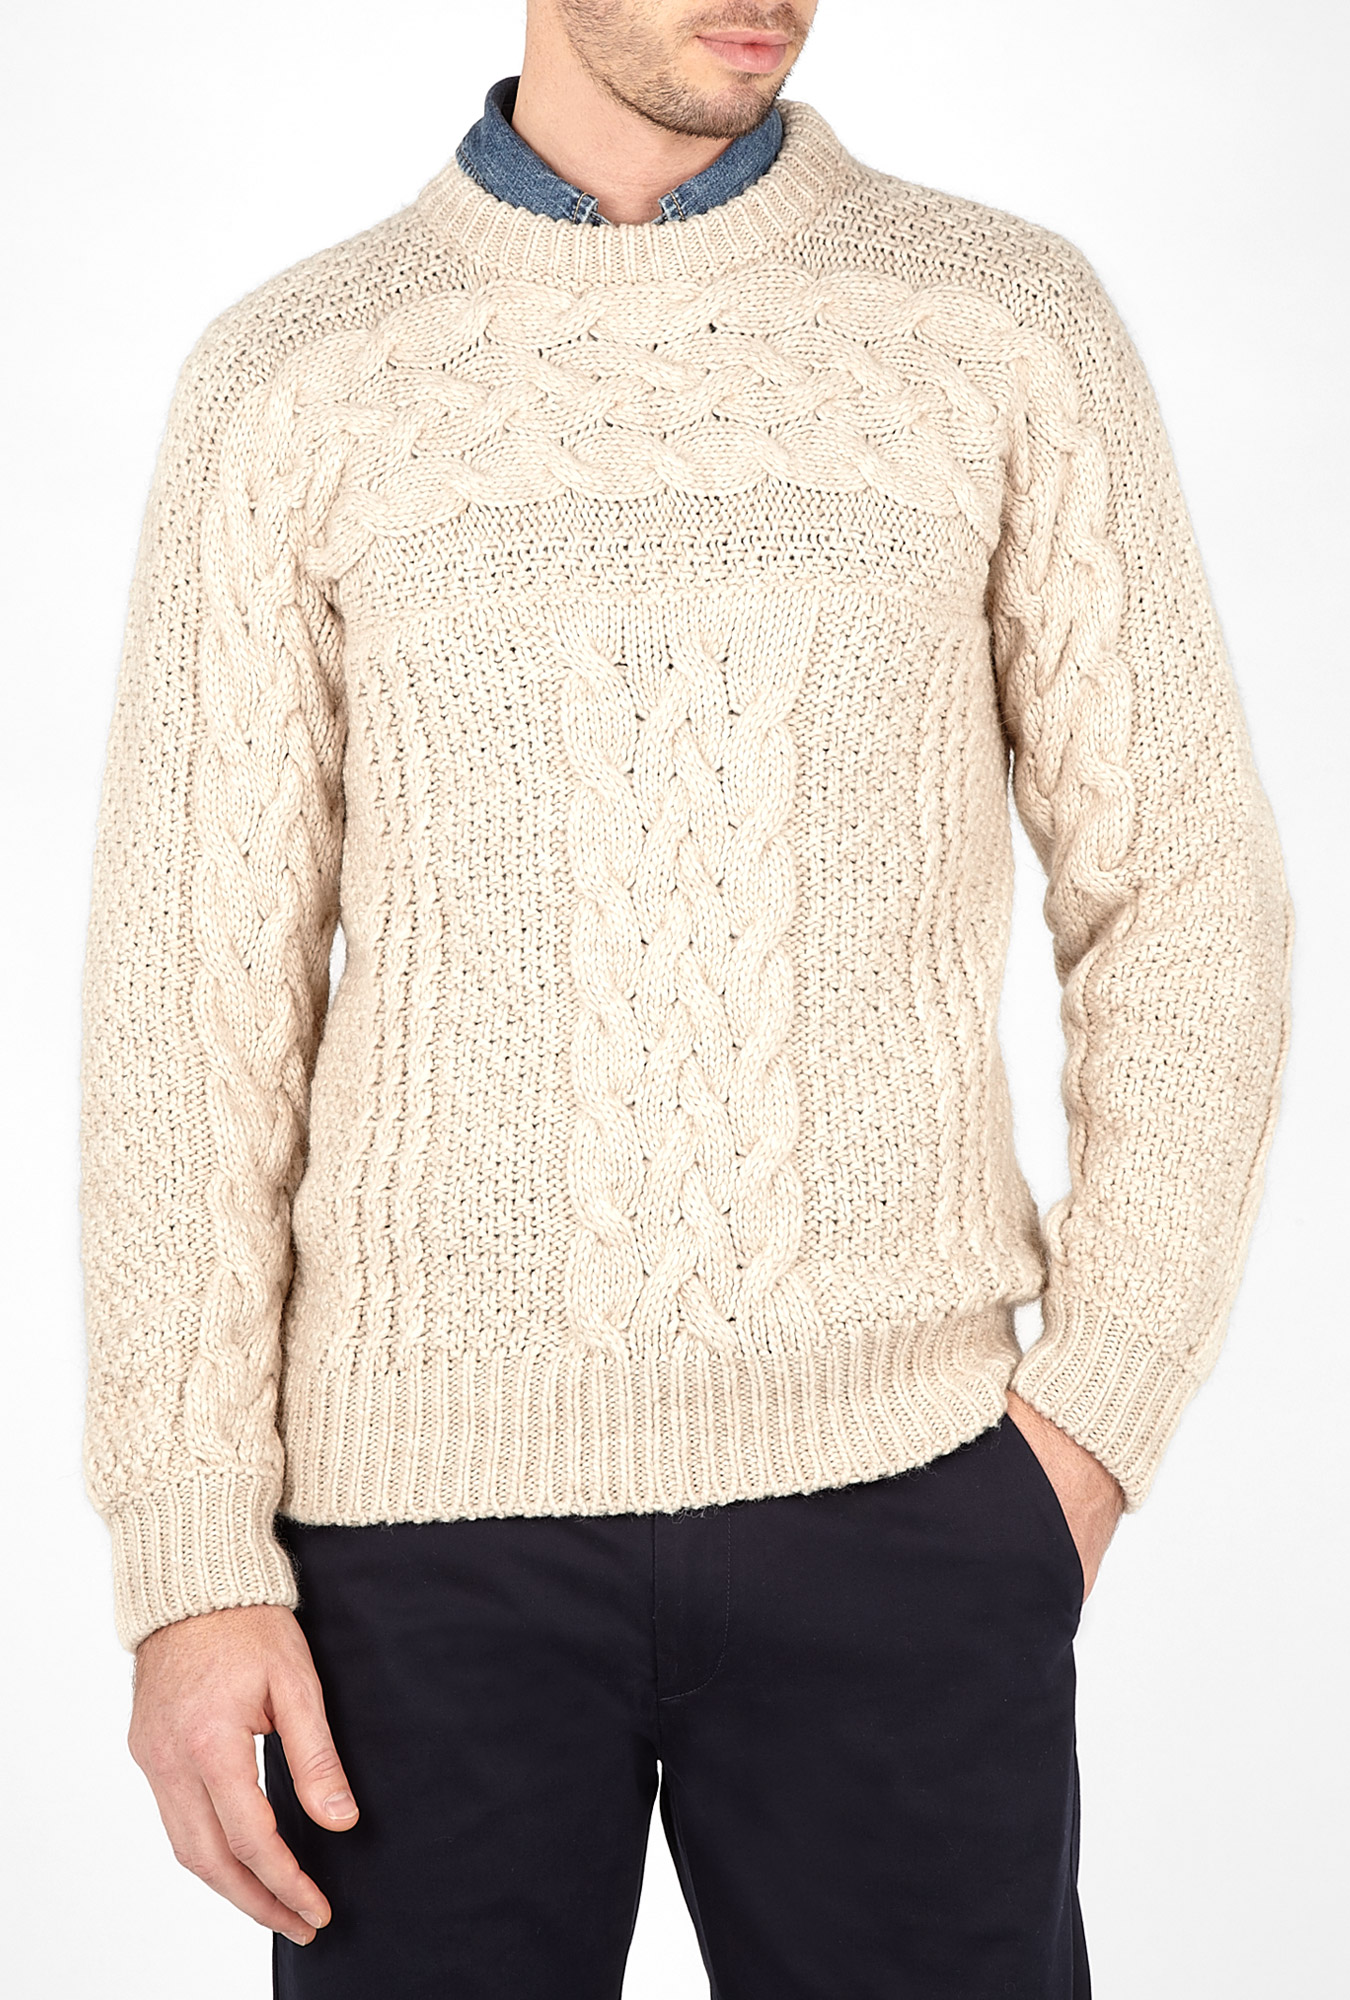 D&g Cream Chunky Cable Knit Jumper in Beige for Men (cream) | Lyst